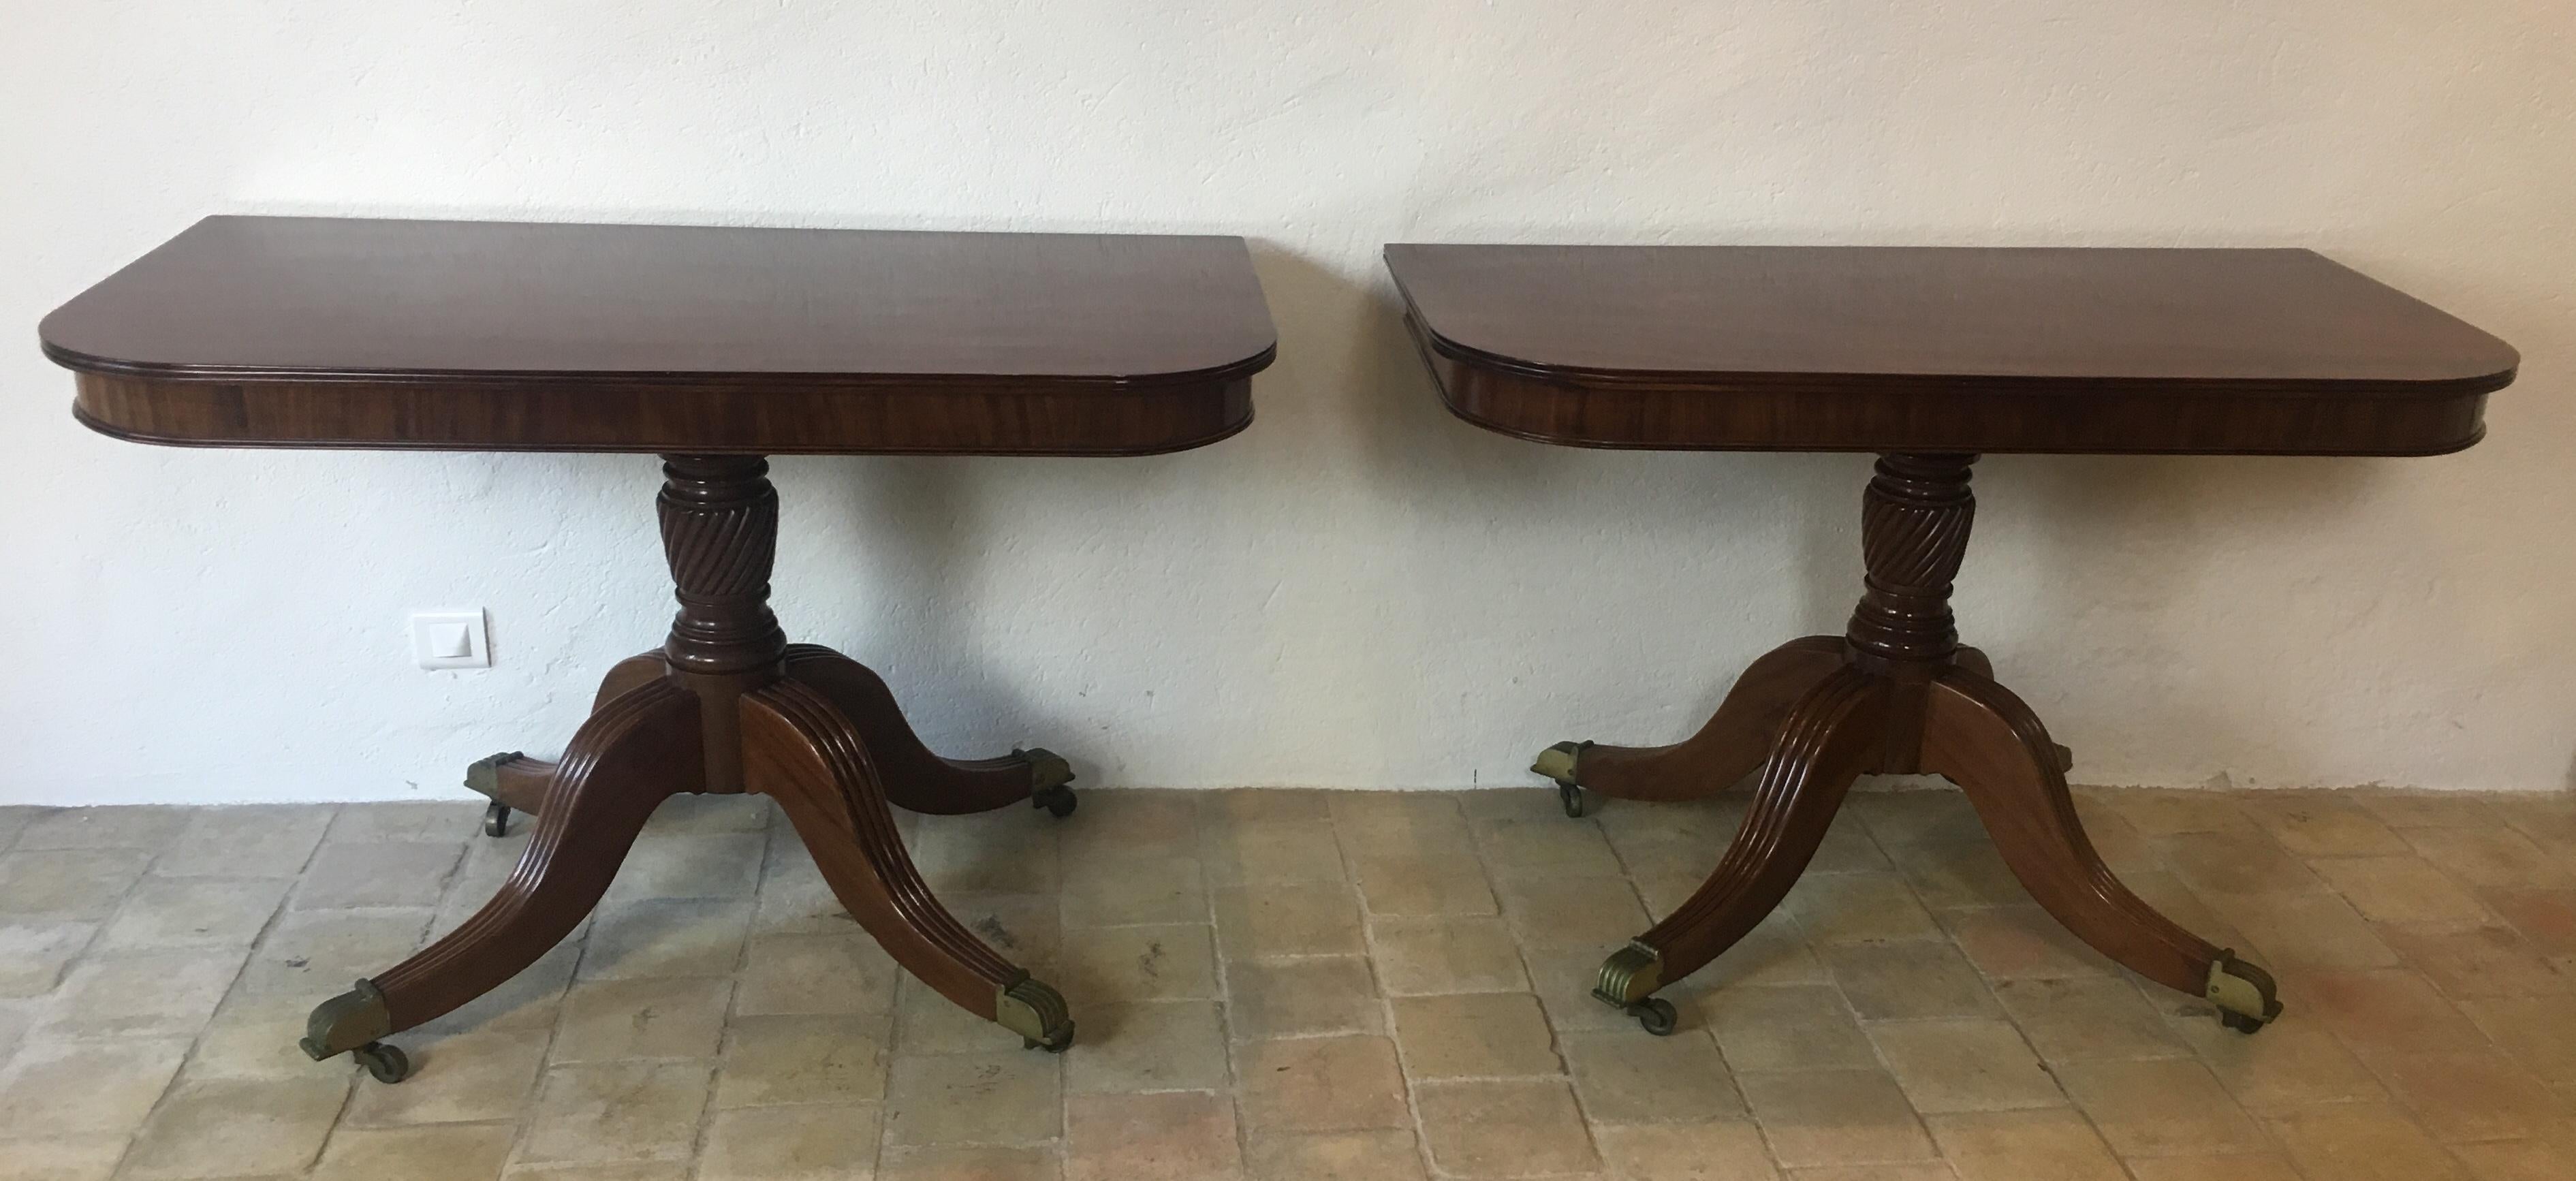 19th Century English Mahogany Double Pedestal Extending Dining Table For Sale 5